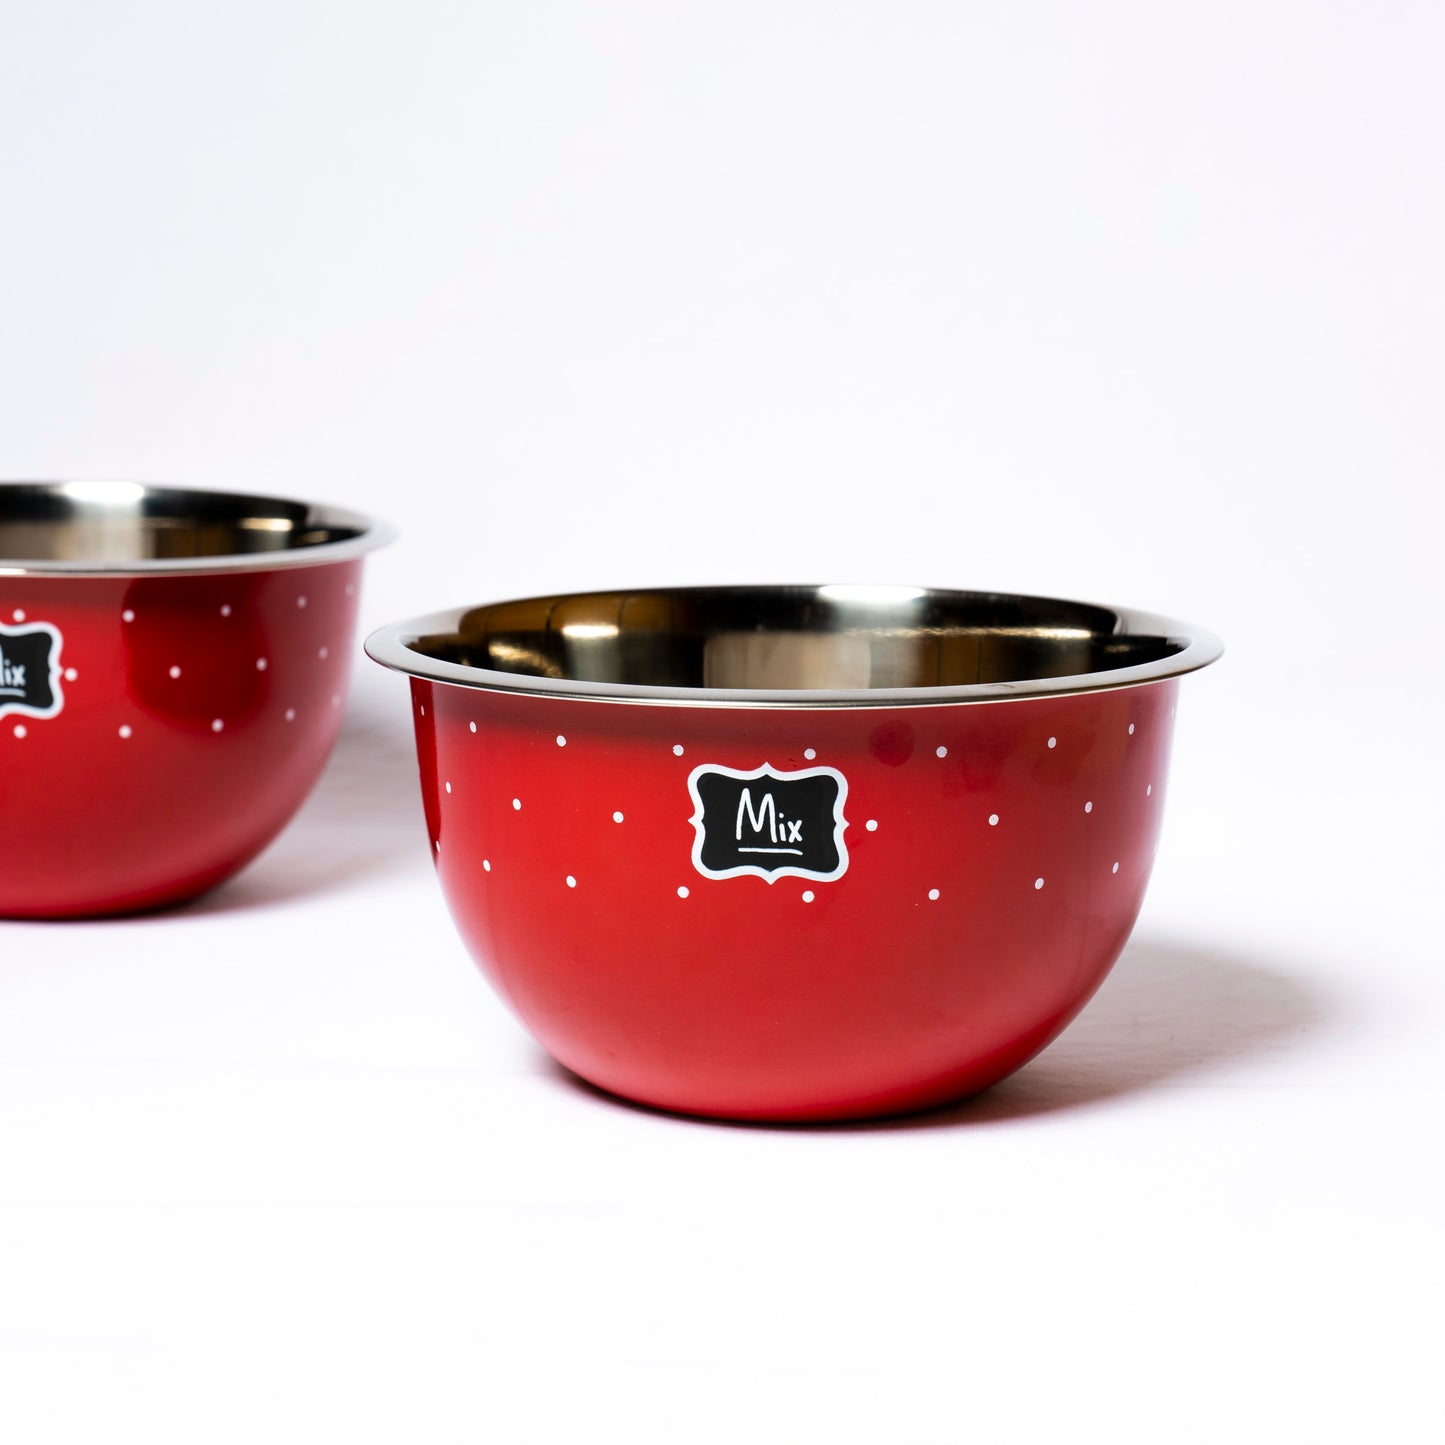 Polka Dot Steel Mixing Bowl (Red) - MBST0001 - View 4